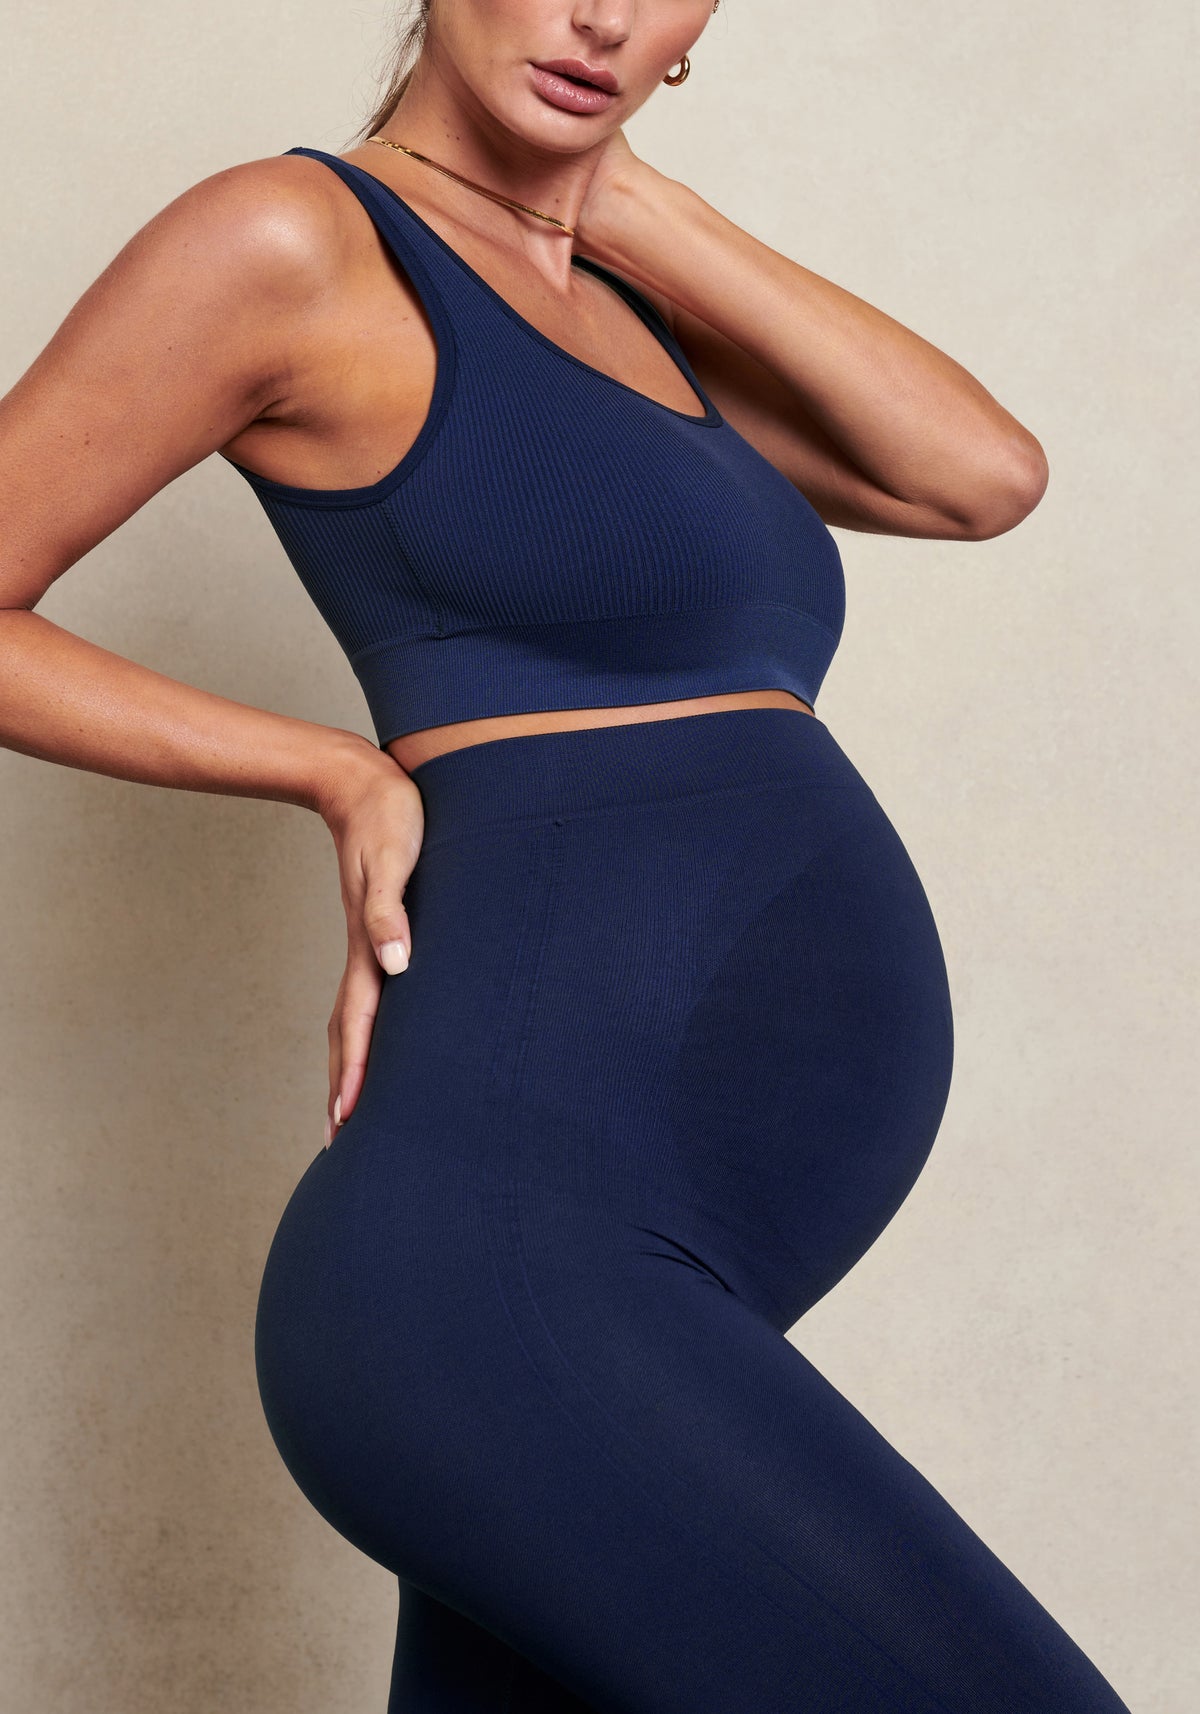 Blanqi Maternity Belly Support Tank Top for Sale in El Paso, TX